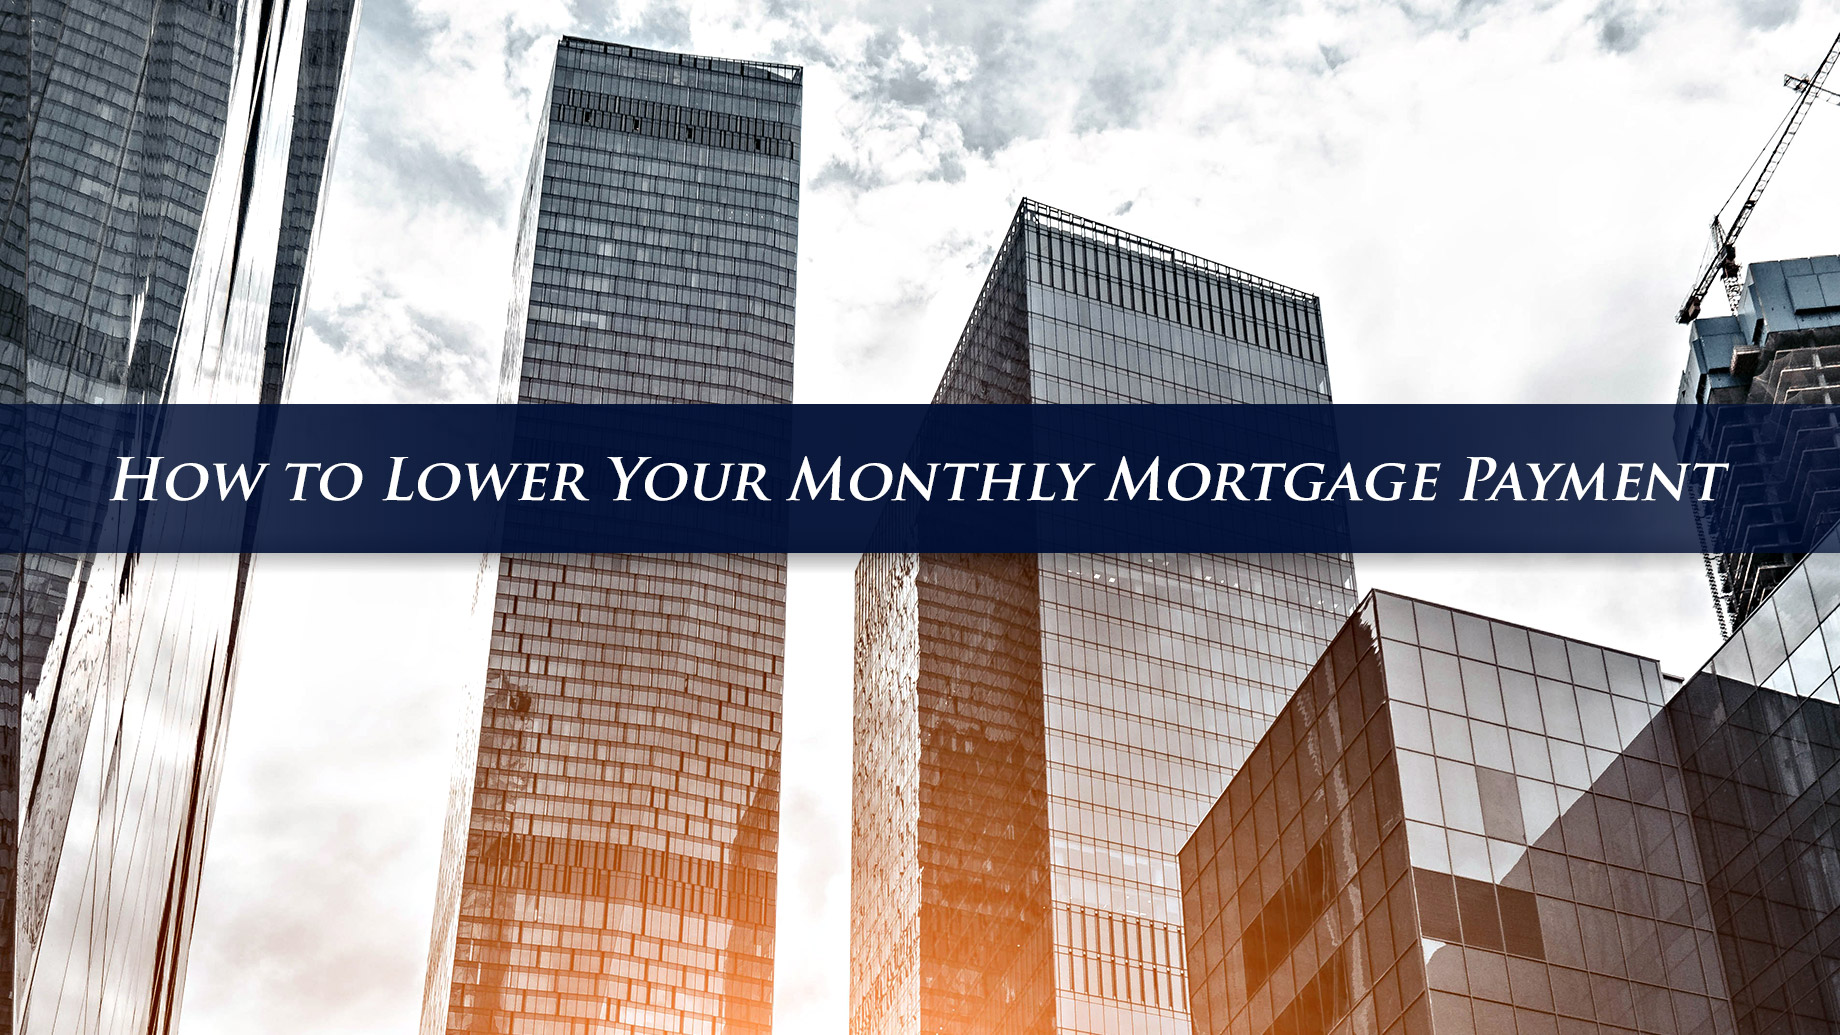 How to Lower Your Monthly Mortgage Payment